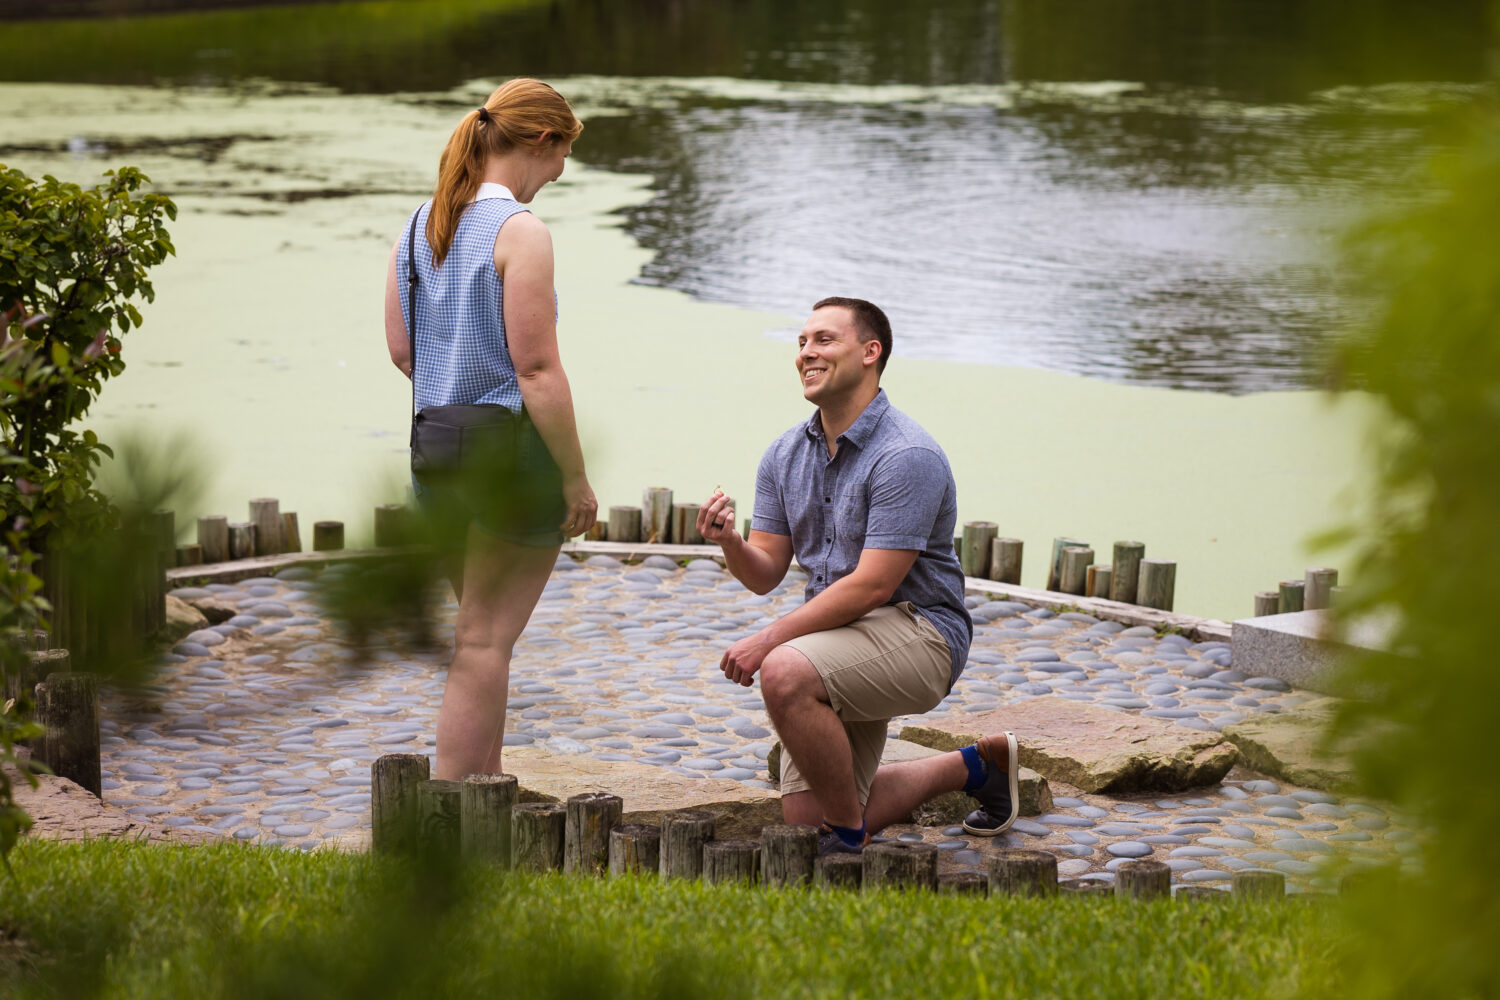 surprise propsal photographer, lisa rhinehart, captures this exact moment when the guy got down on one knee to propose to his girlfriend inside of the Missouri botanical gardens in st louis Missouri 